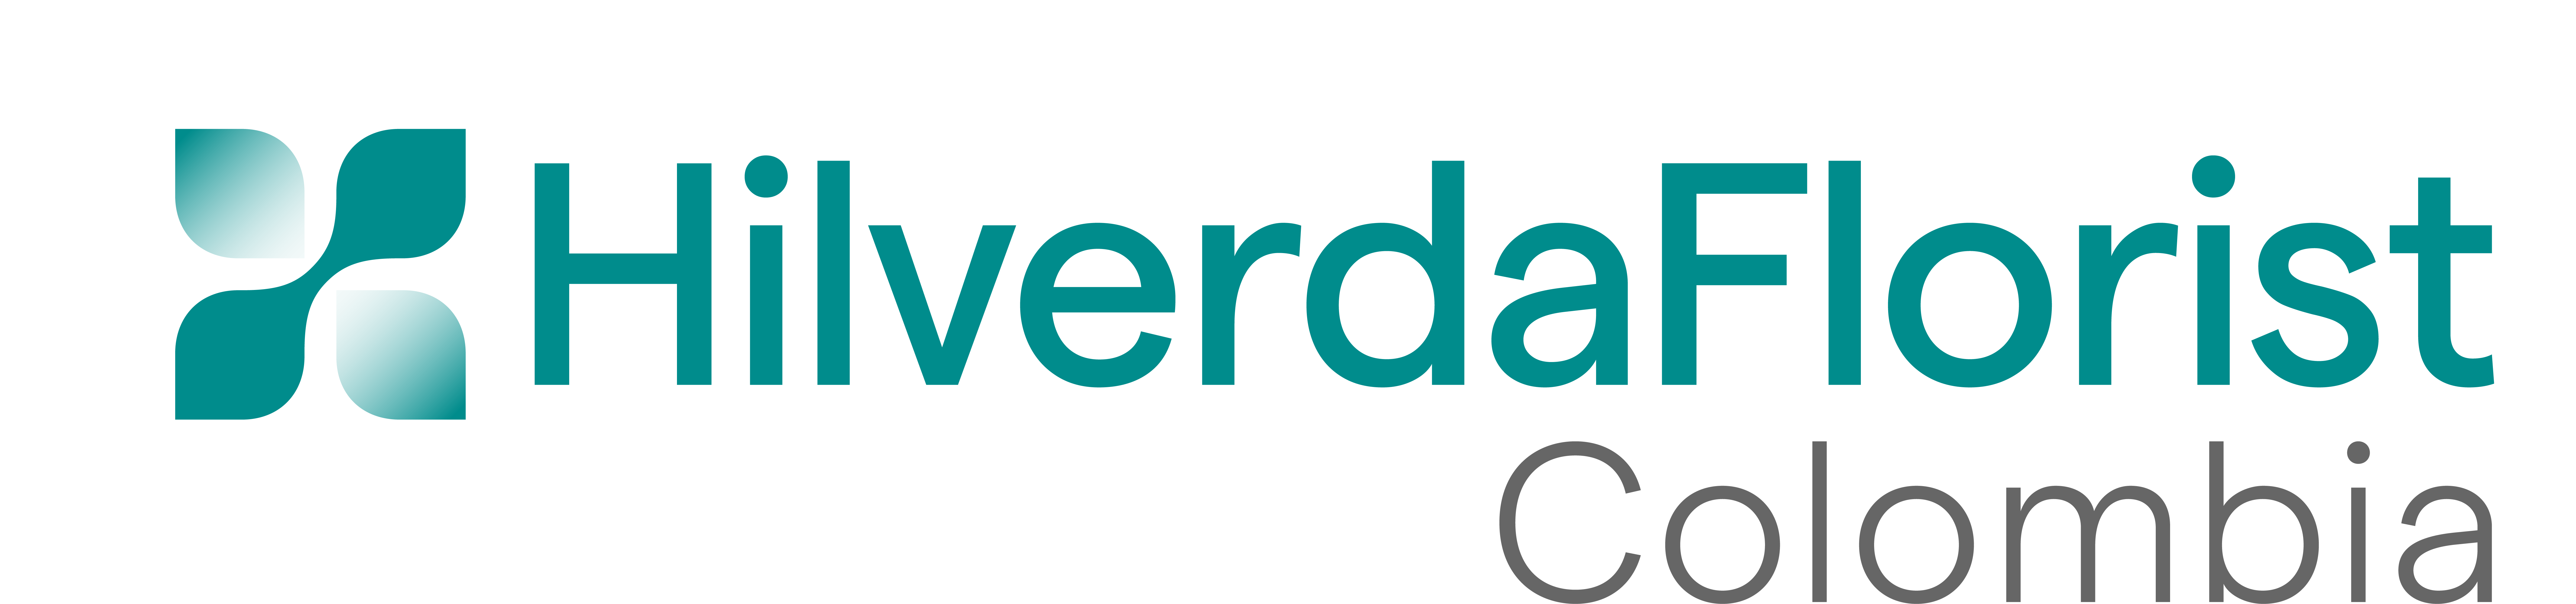 HilverdaFlorist Colombia_Full logo_RGB_Turquoise